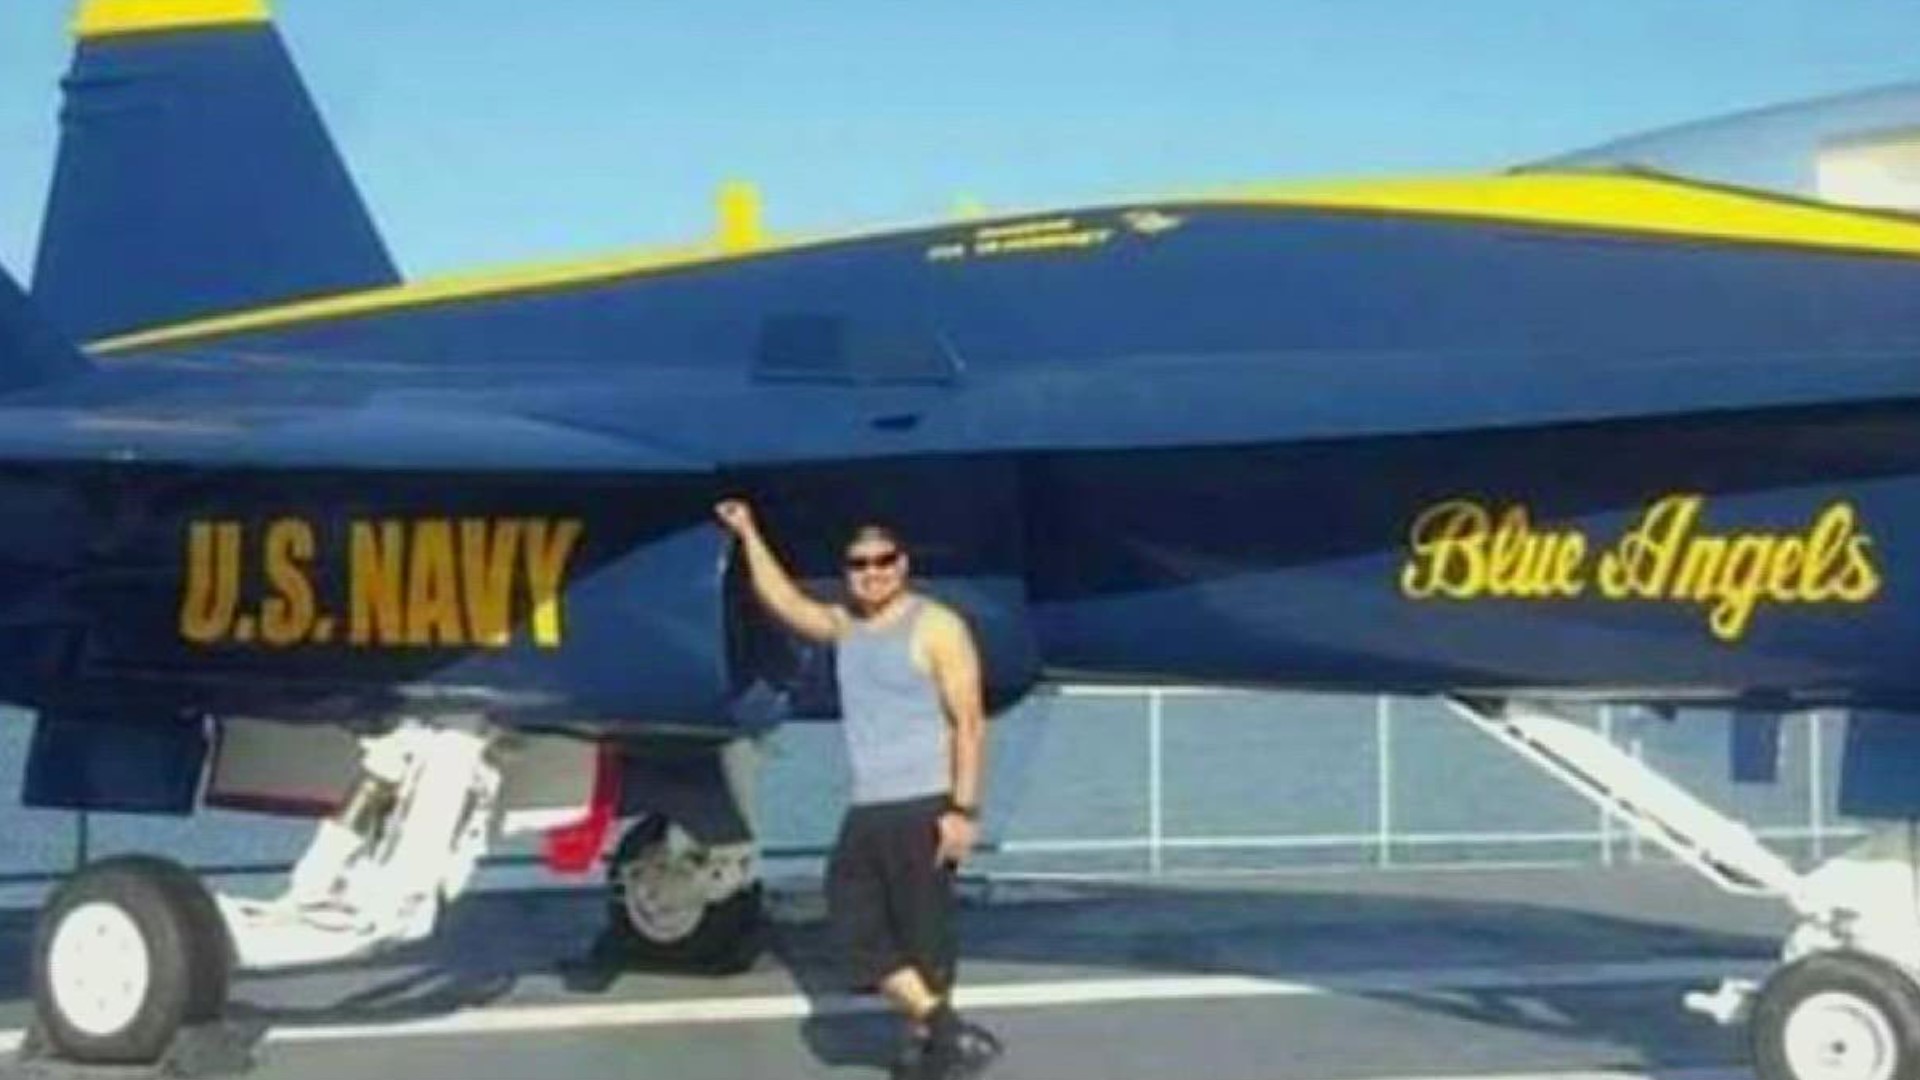 Little did Jose Cruz know when posing for a picture with this Blue Angels plane years ago, he would one day get the opportunity to live out a lifelong dream.